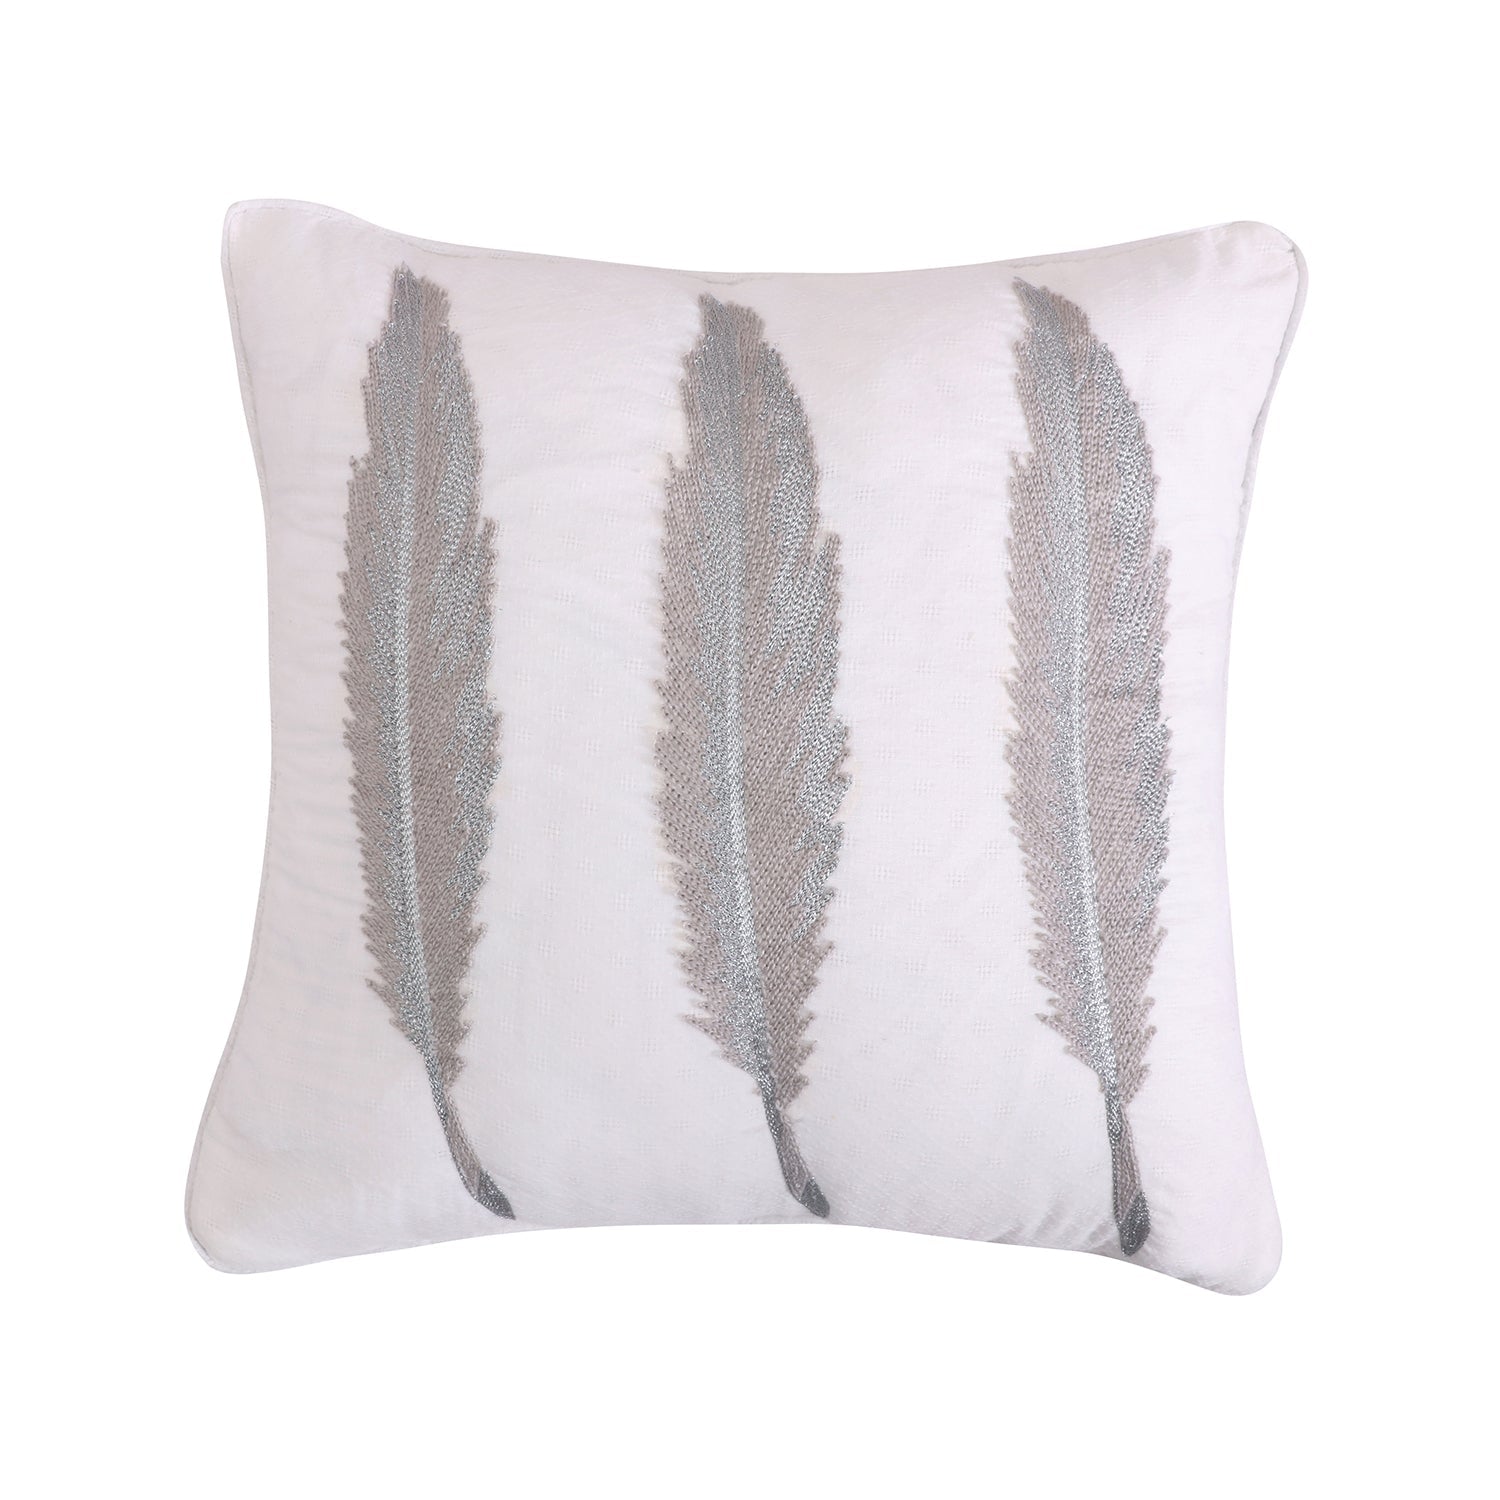 Mirage Silver Feathers Pillow